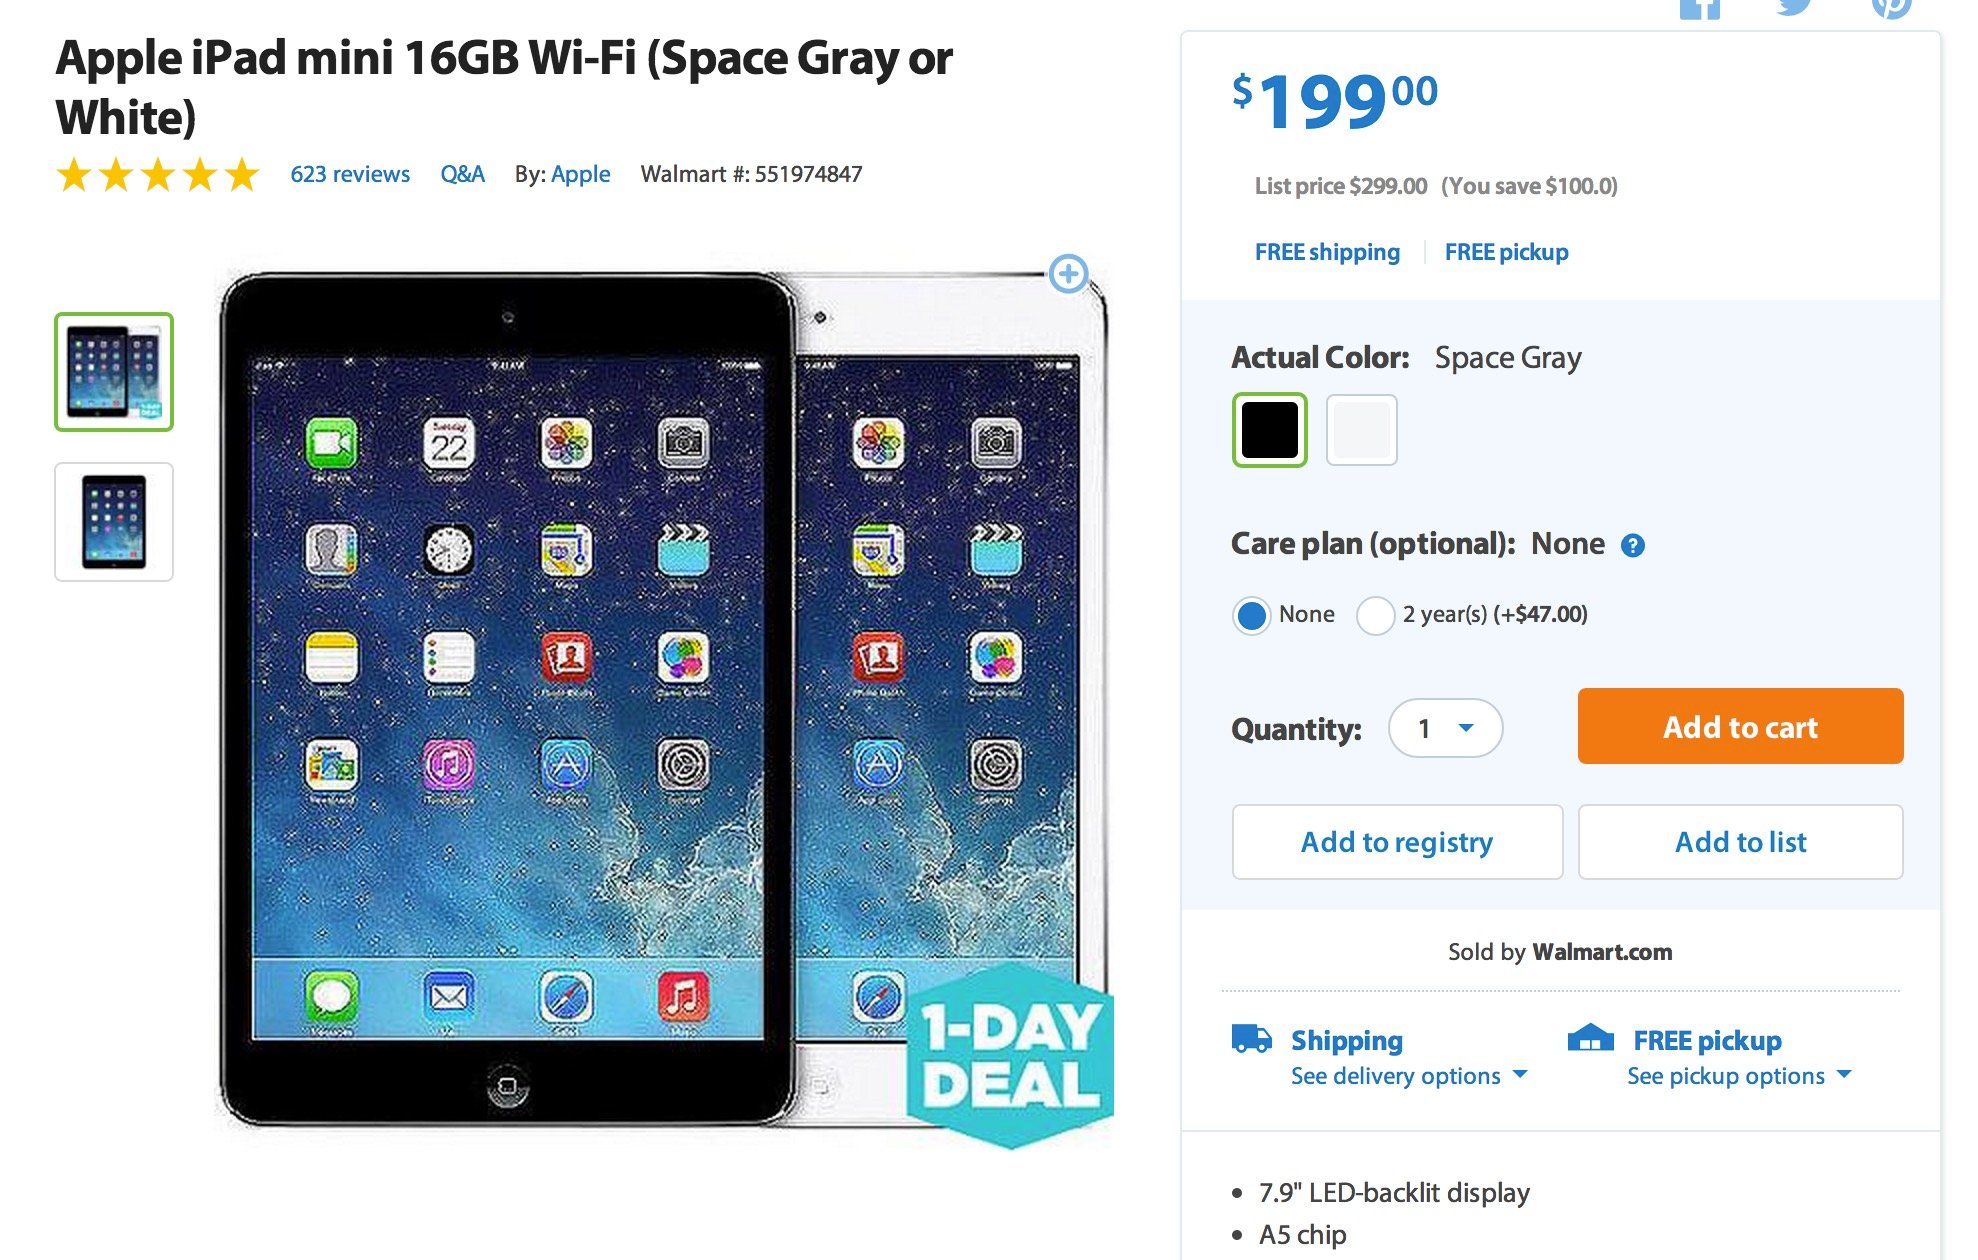 Black Friday 2014 deals include inflated savings.